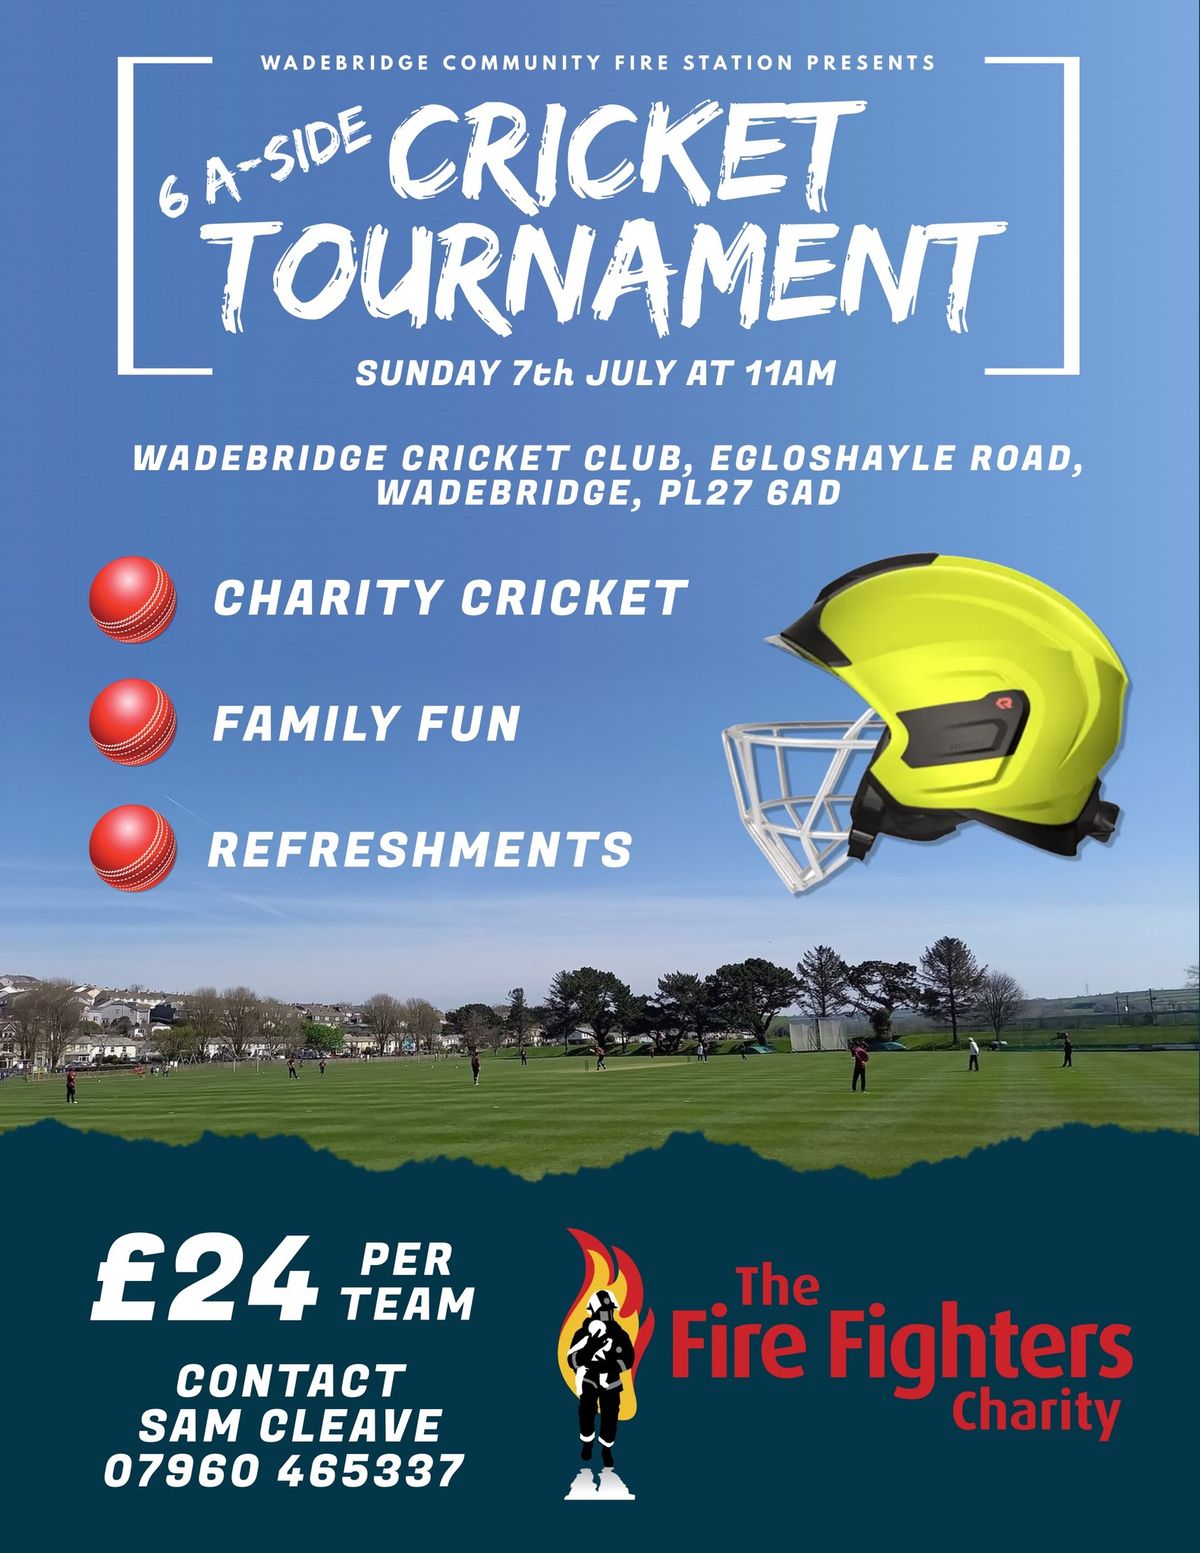 6 A-Side Charity Cricket Tournament